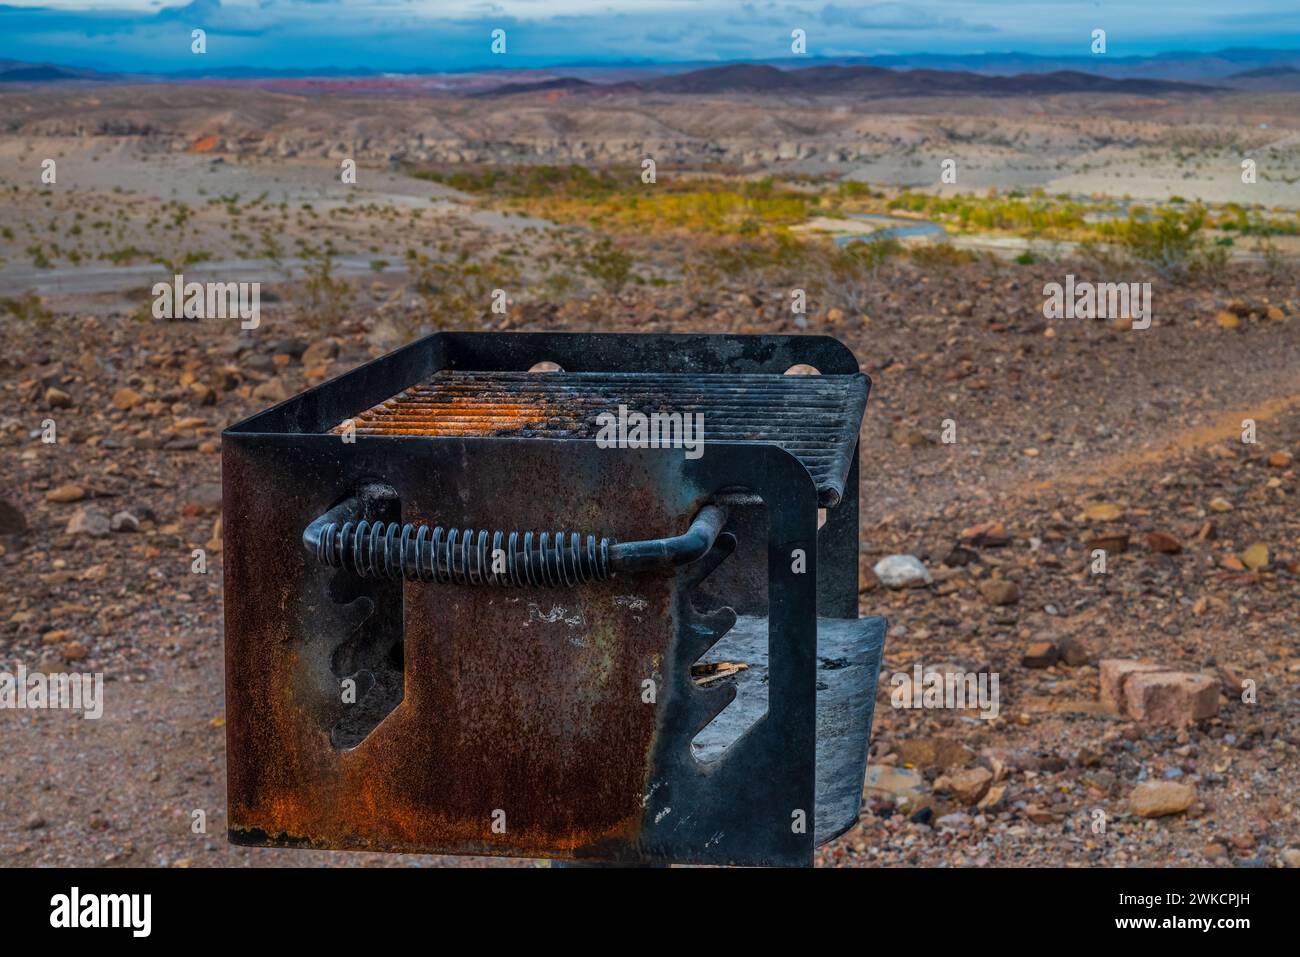 A well-used public grill in a desert setting, at a recreational area near Lake Mead. Stock Photo